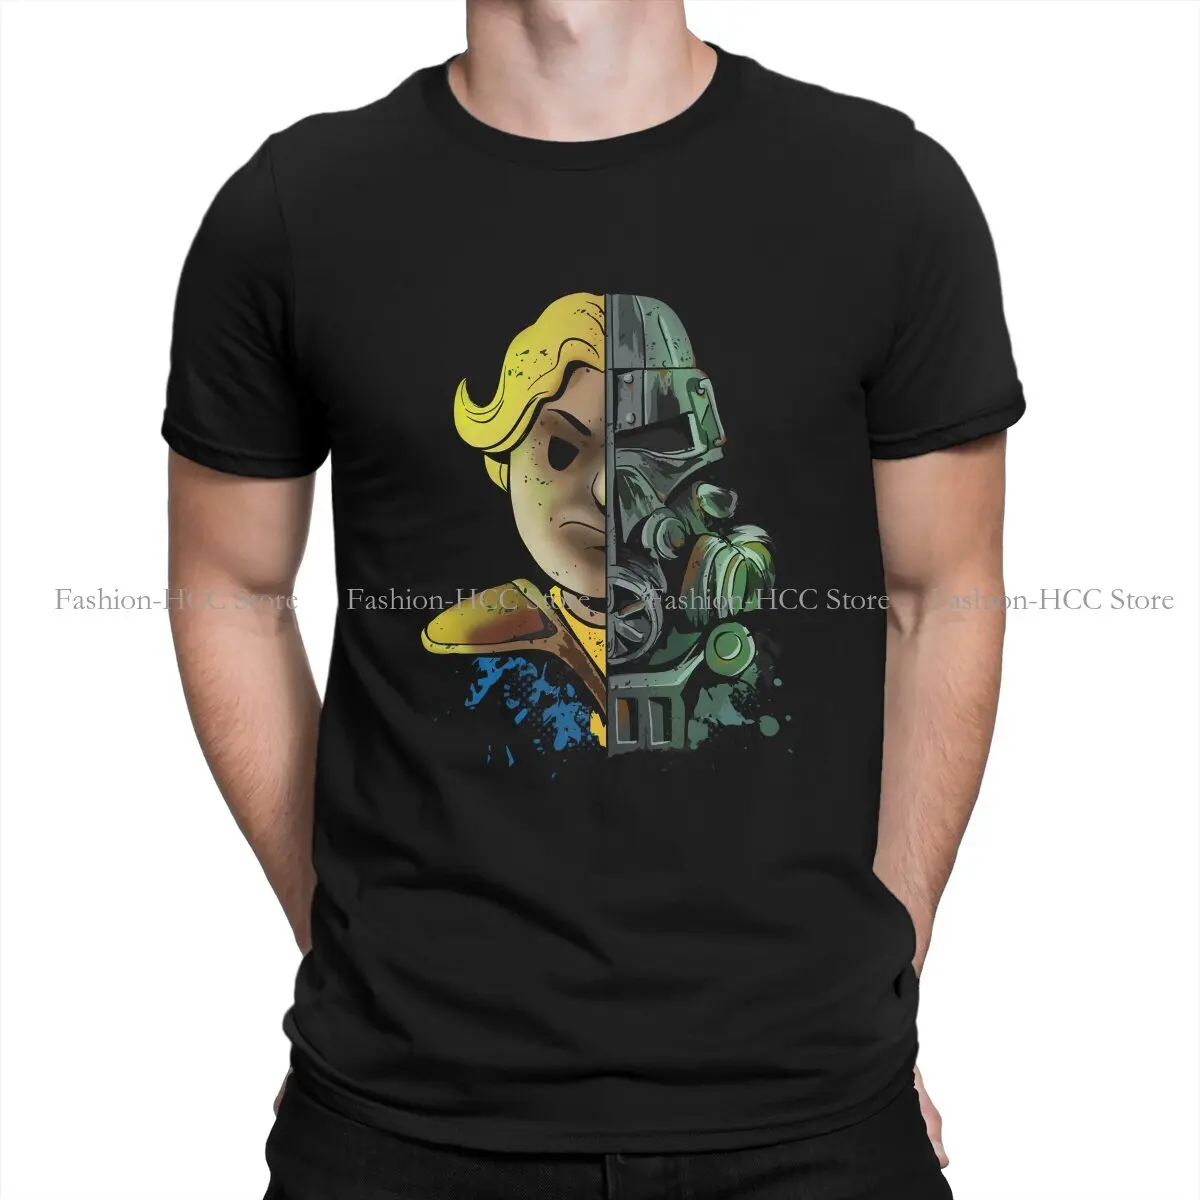 

Face Off Hipster Polyester TShirts Fallout Vault Boy Game Male Harajuku Tops T Shirt Round Neck